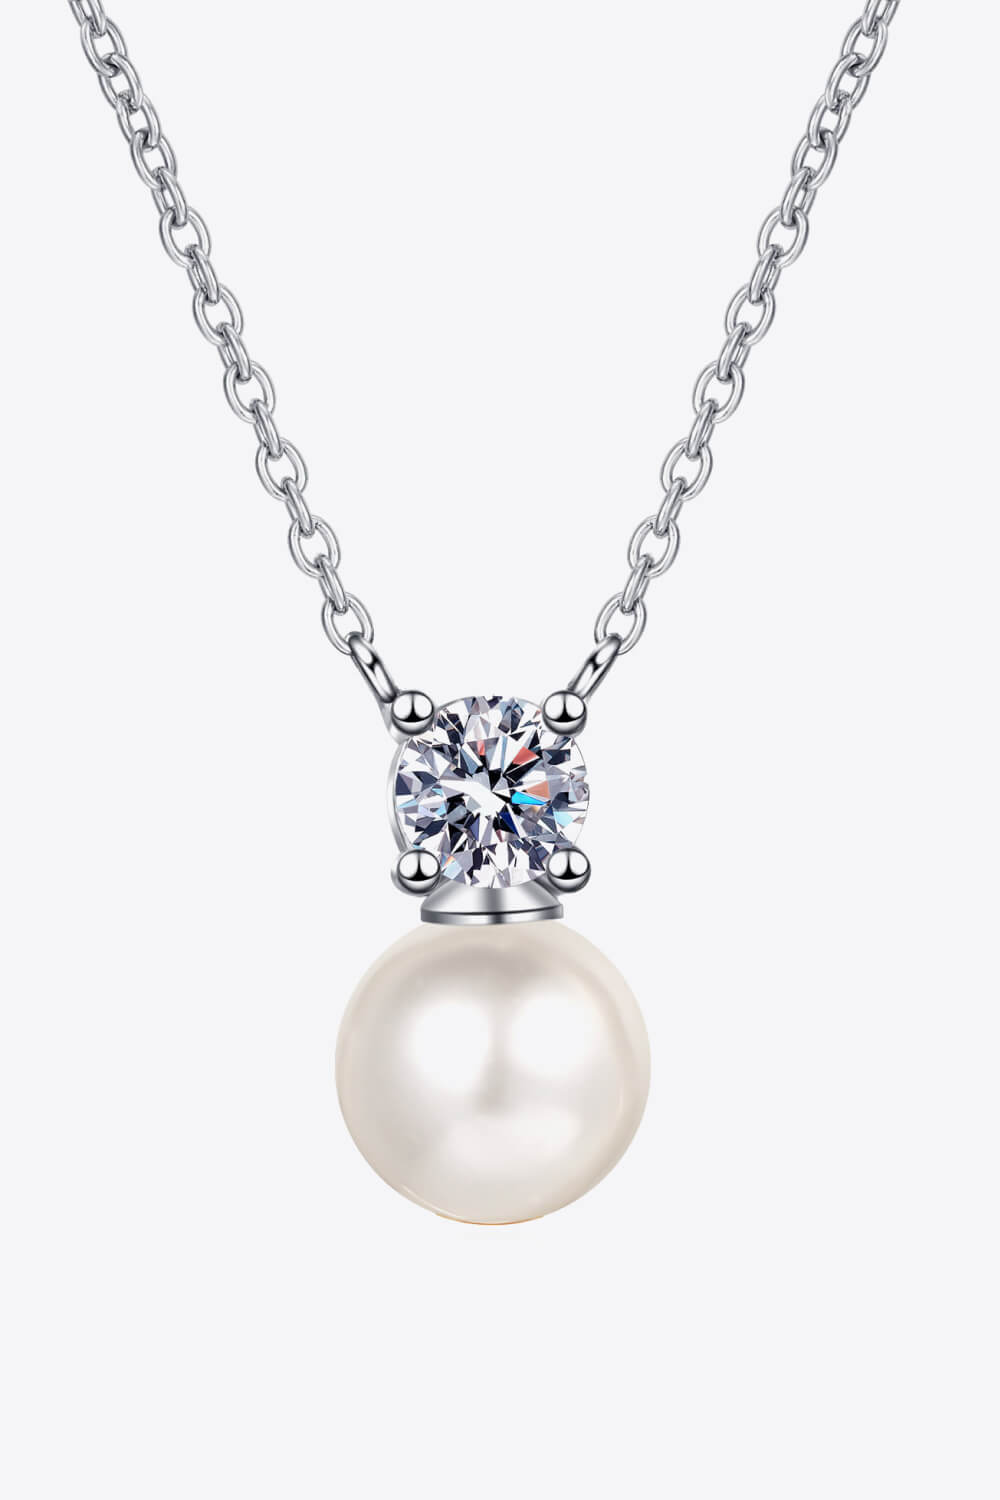 925 Sterling Silver Freshwater Pearl Moissanite Necklace - Sharon David's